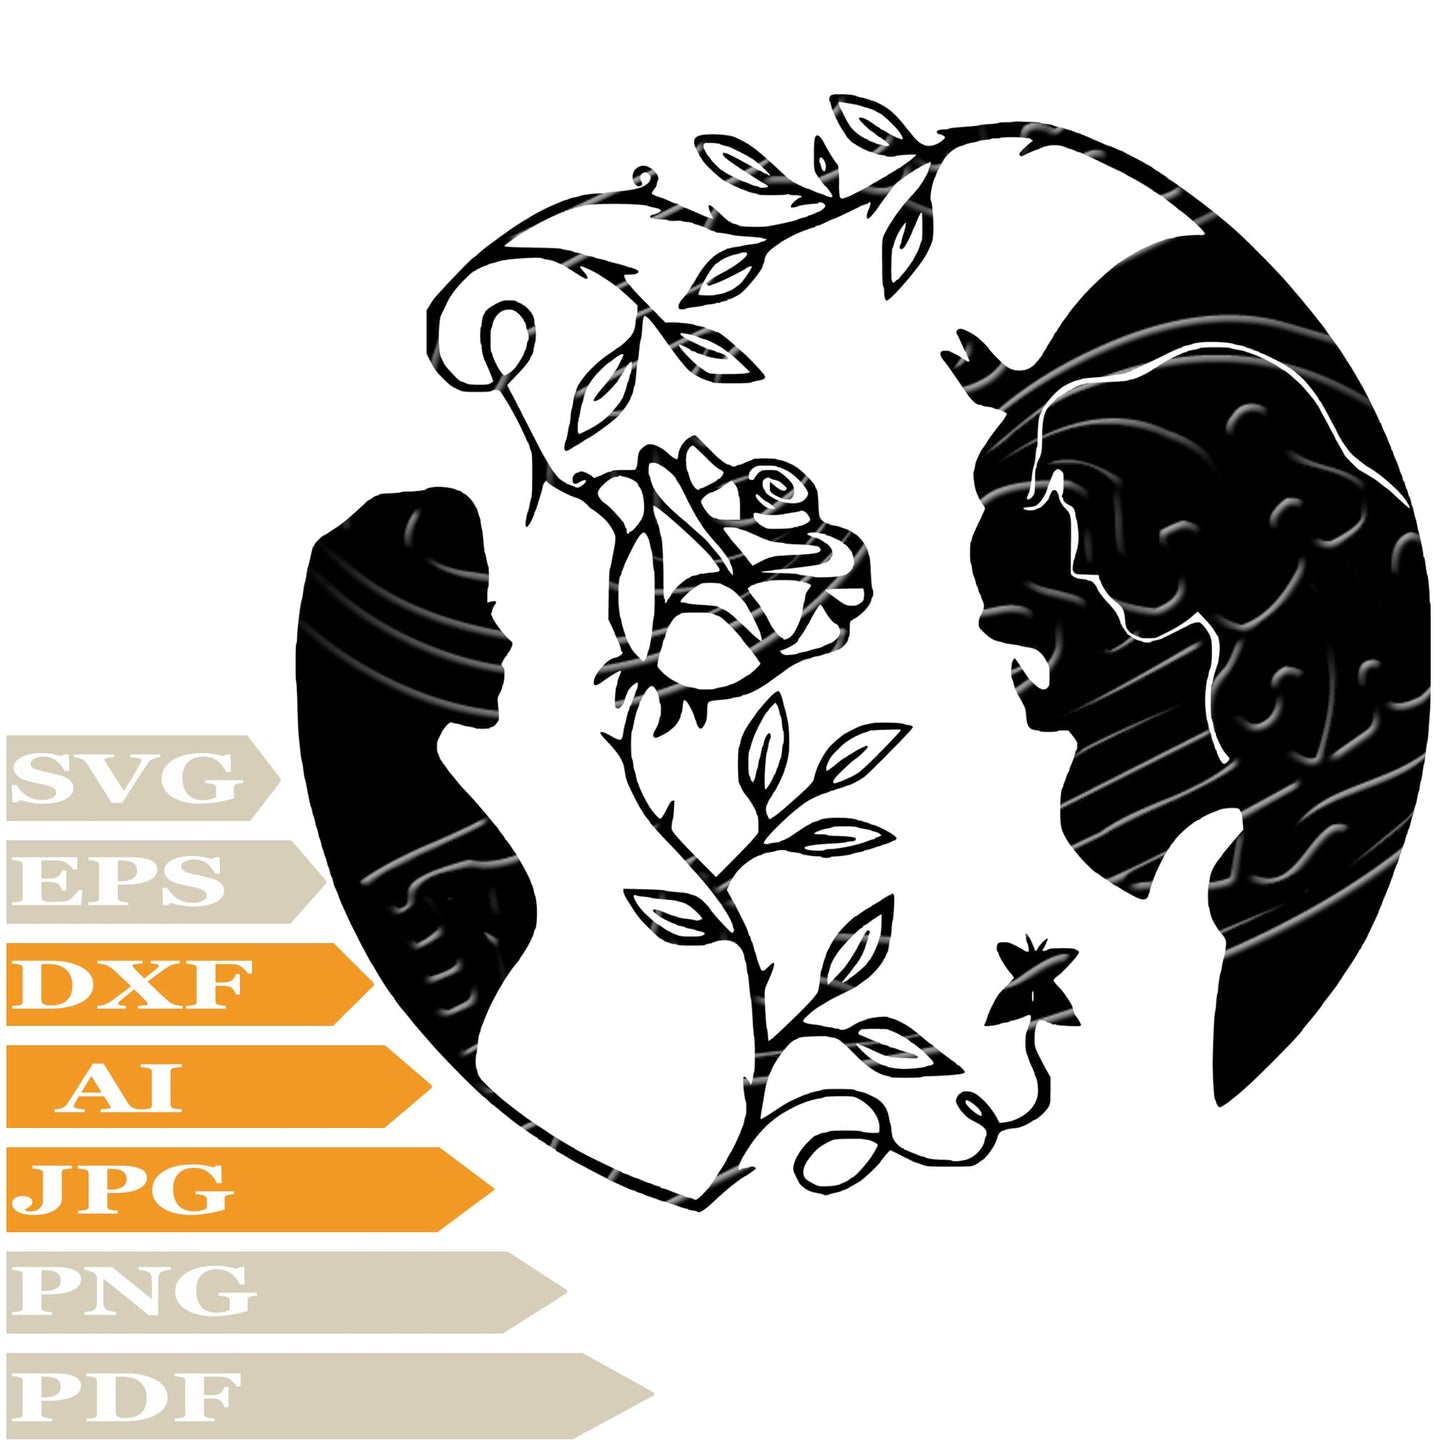 Beauty and the Beast Svg File, Image Cut, Png, For Tattoo, Silhouette, Digital Vector Download, Cut File, Clipart, For Cricut